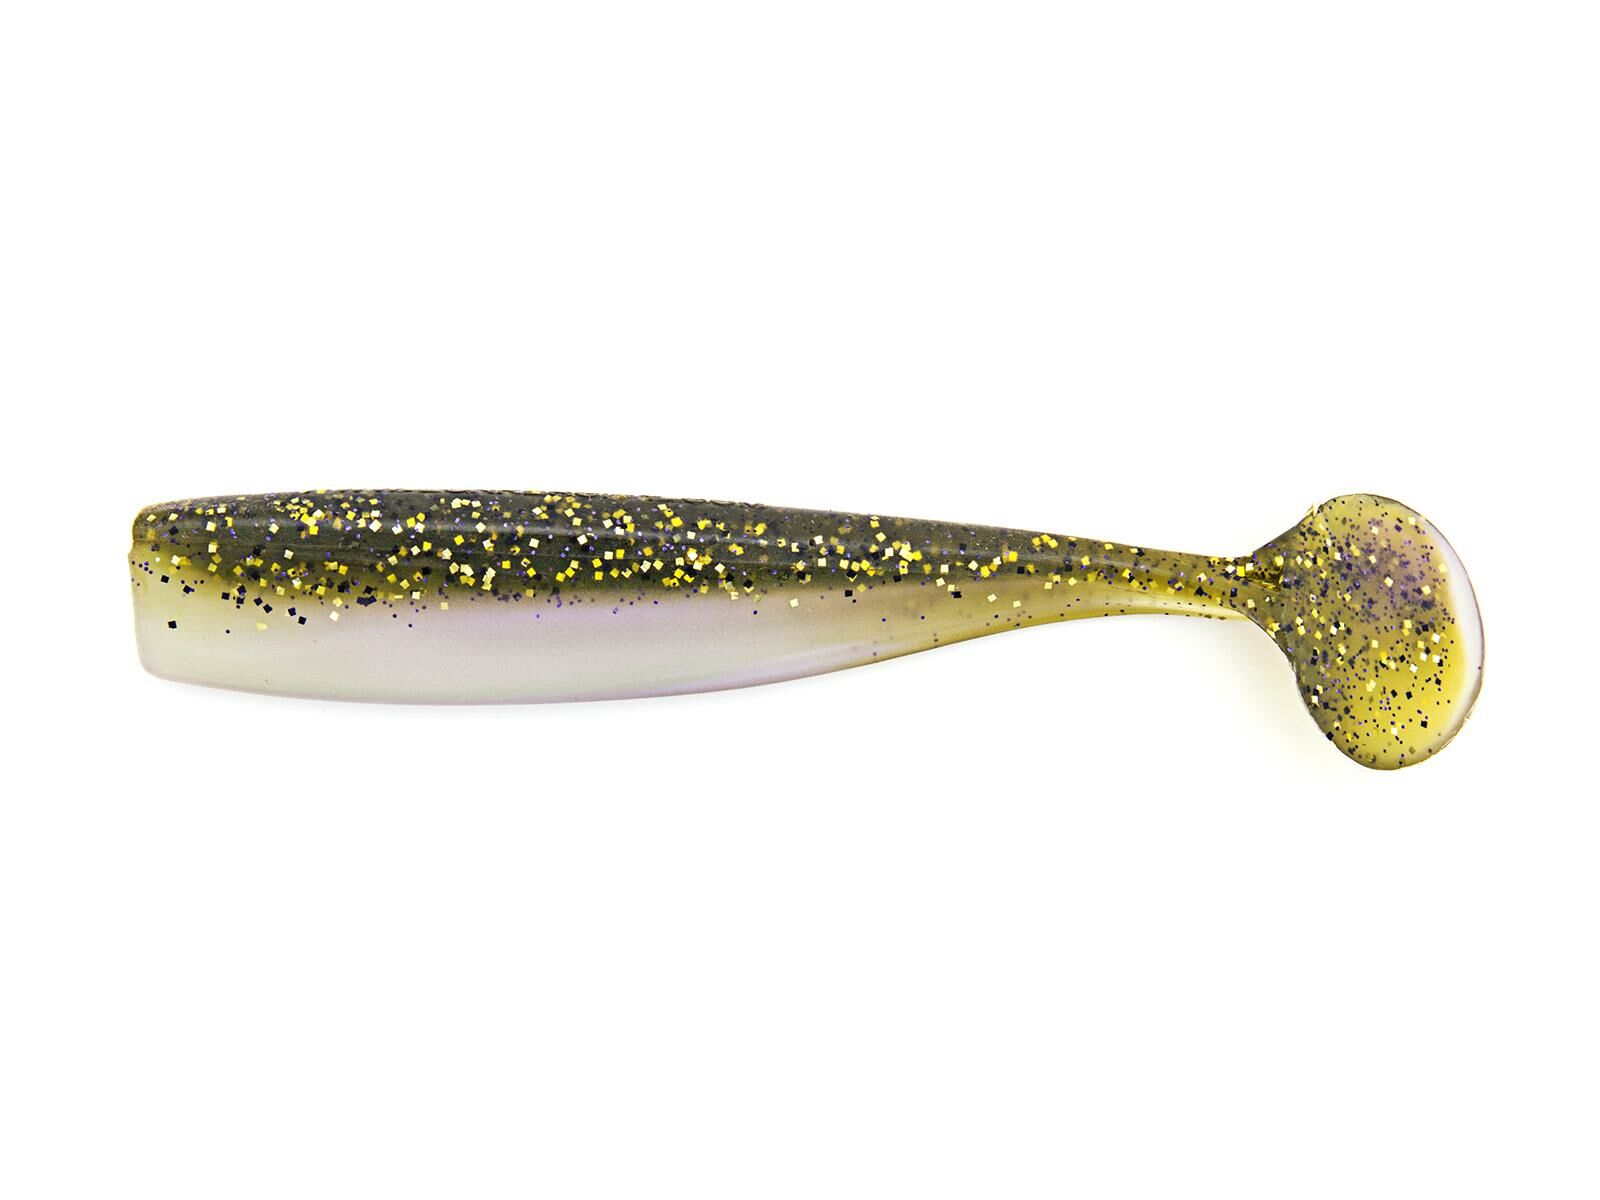 6" Shaker - Goby